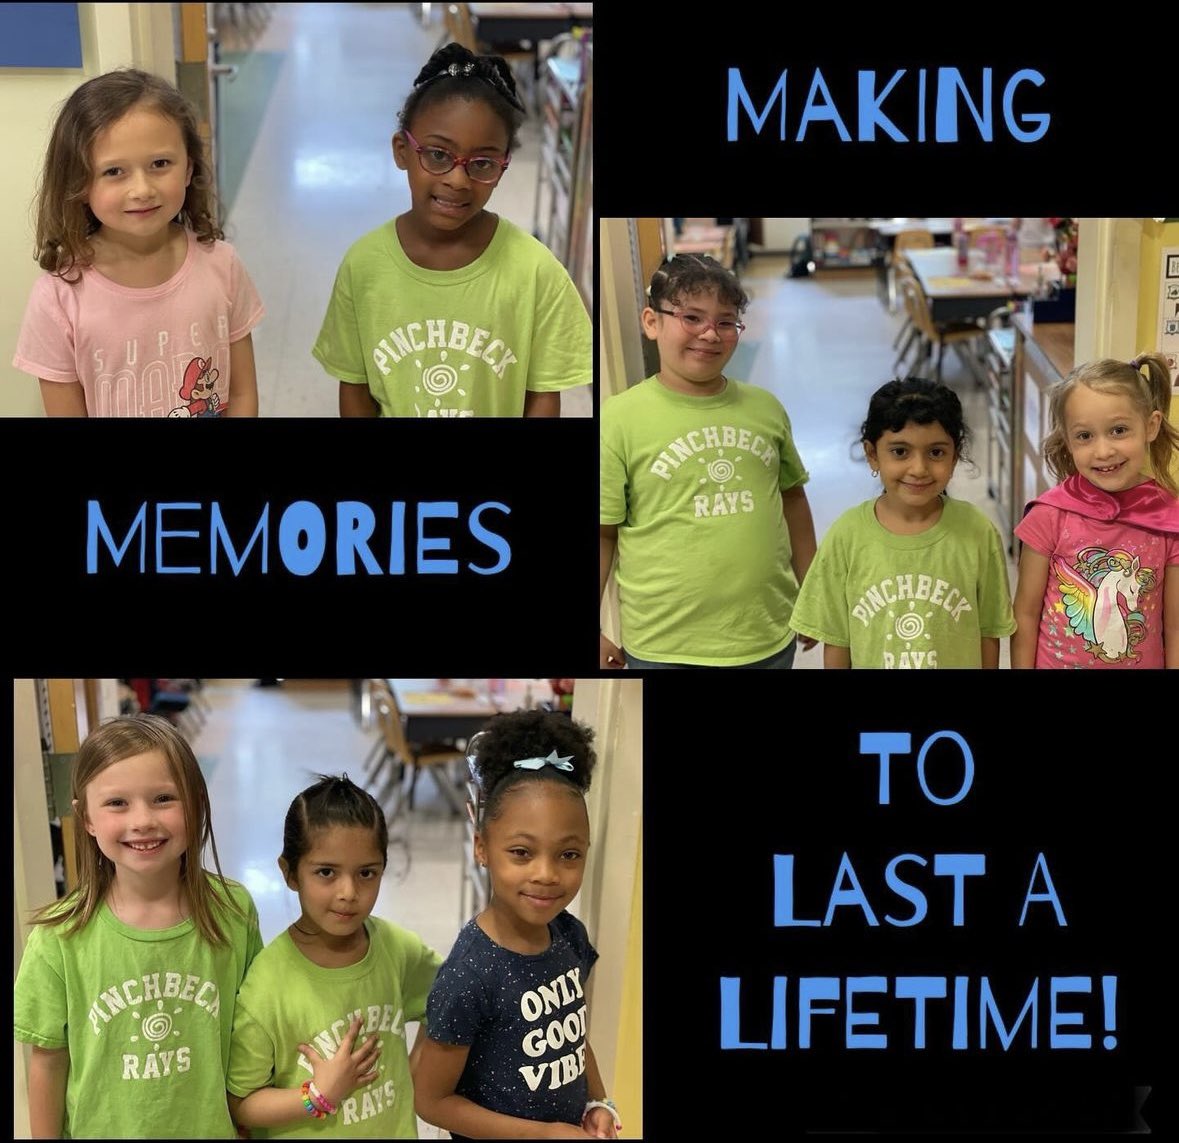 Our 1st graders hosted penpals from Pinchbeck Elementary for fun activities! Connecting with students from another school - what an enriching experience! Huge thanks to our first-grade teachers from both schools for making this incredible experience happen.